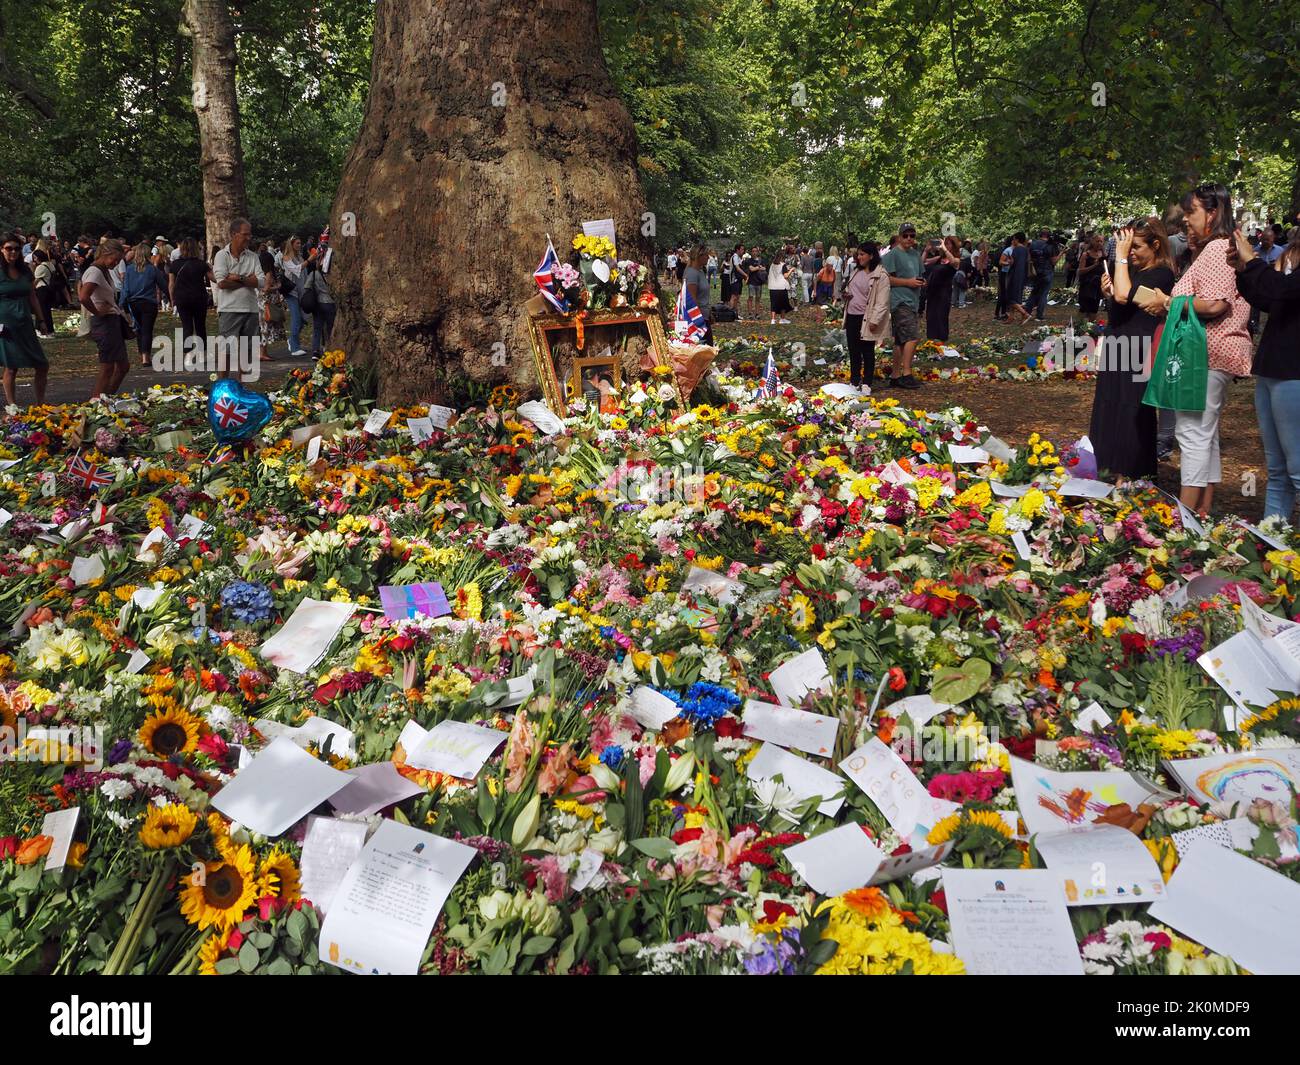 London, UK. 12th Sep, 2022. Death of Queen Elizabeth II. Crowds of people flock to London to pay their respects to the late Queen Elizabeth. Many laying flowers at Buckingham Palace and Green Park. Credit: Julia Gavin/Alamy Live News Stock Photo